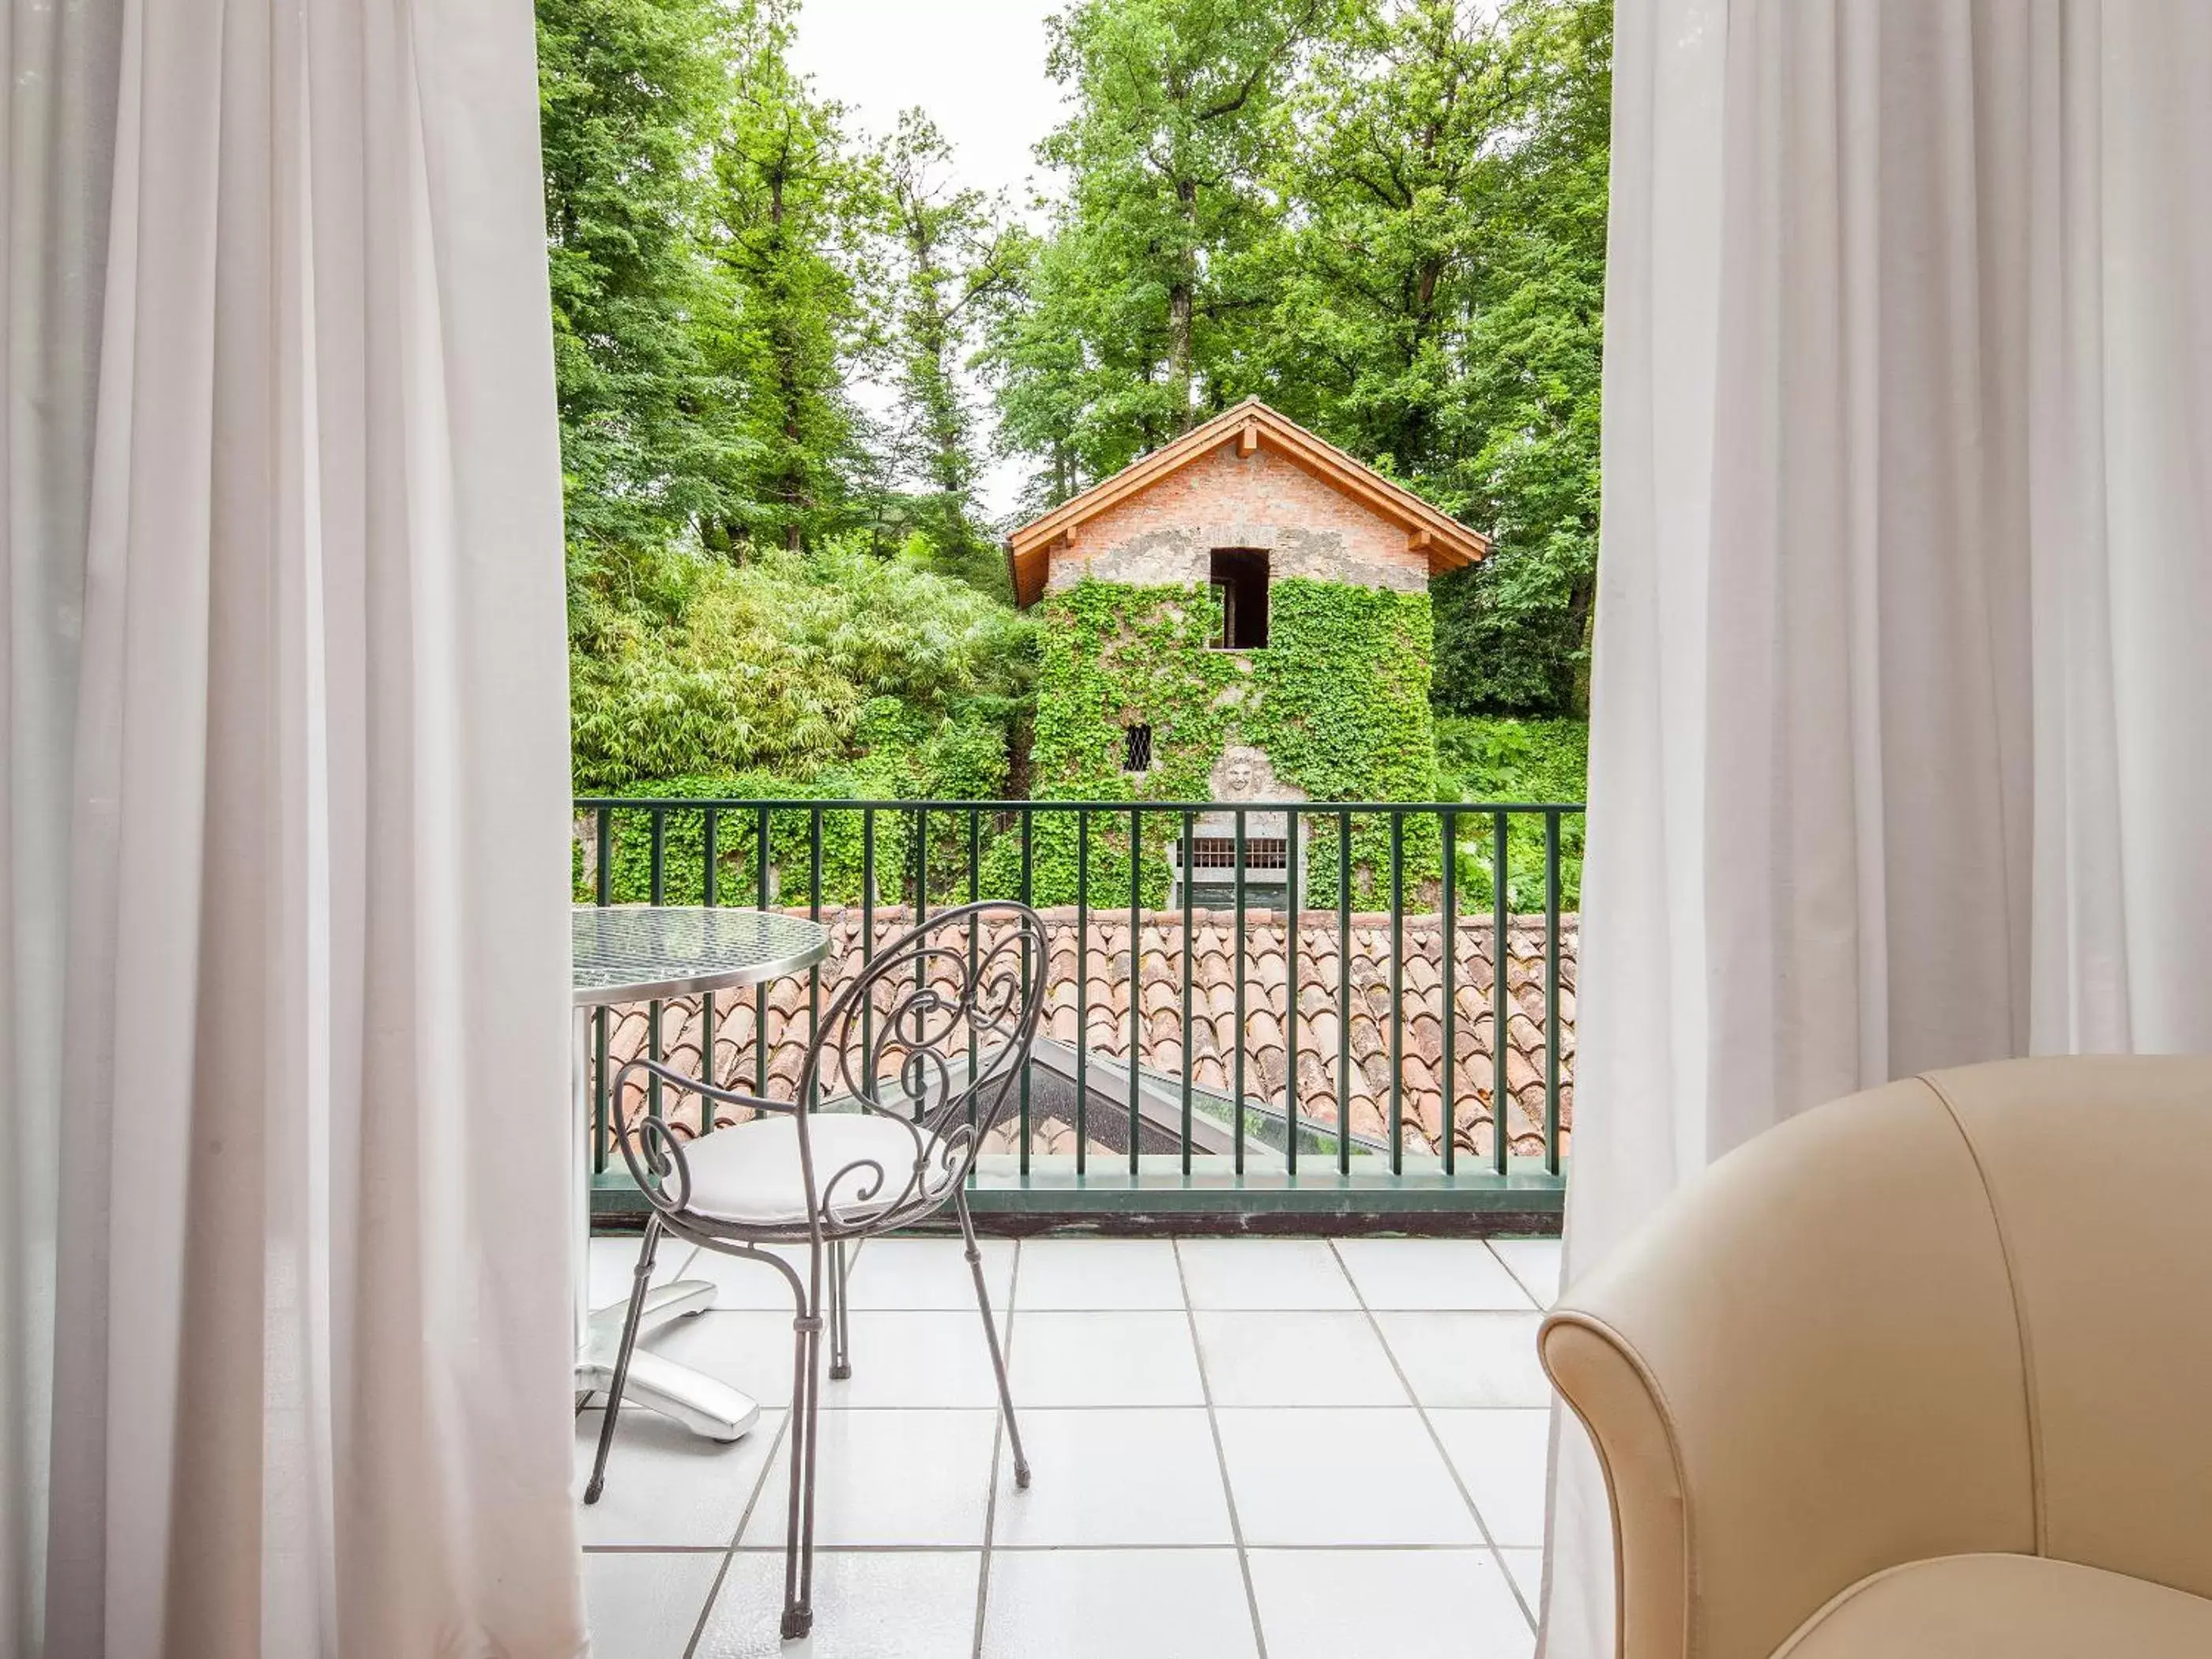 Garden view in Park Hotel Principe - Ticino Hotels Group